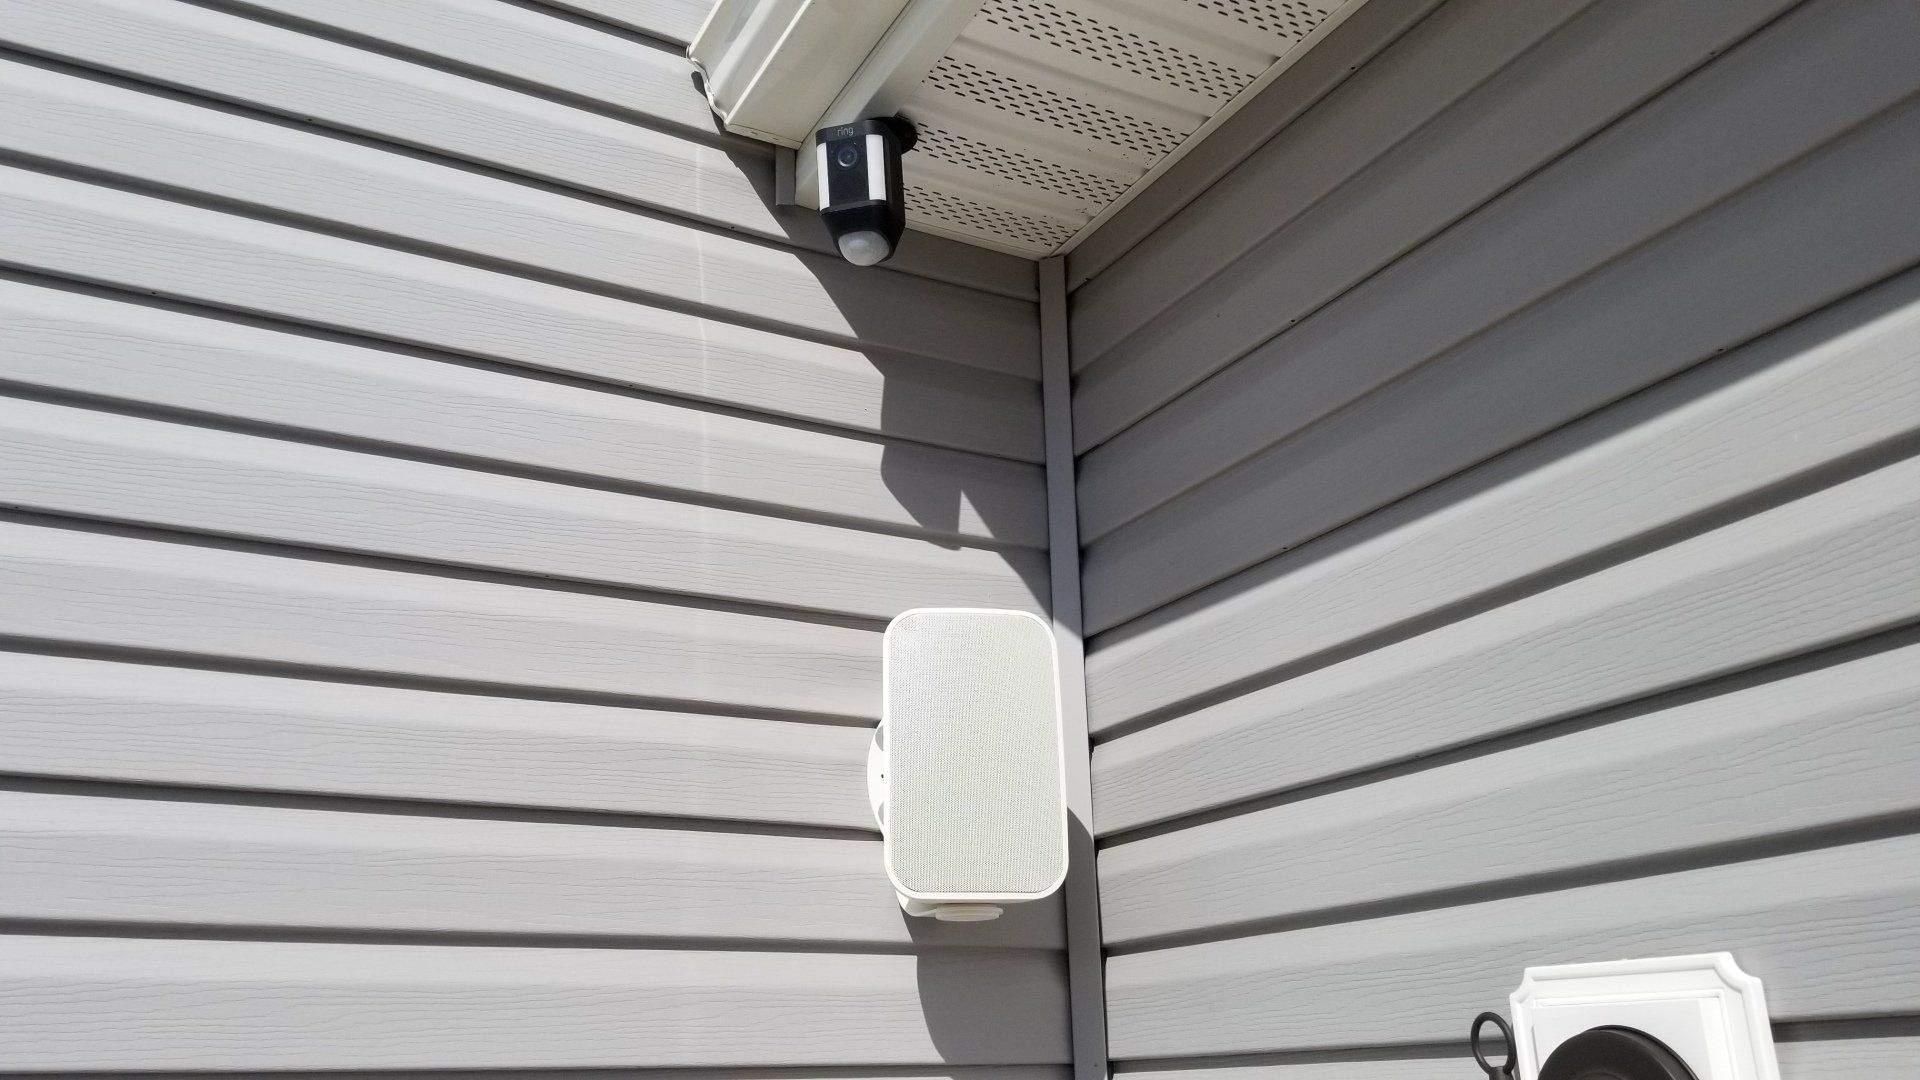 a white outdoor speaker on the side of a house for outdoor audio